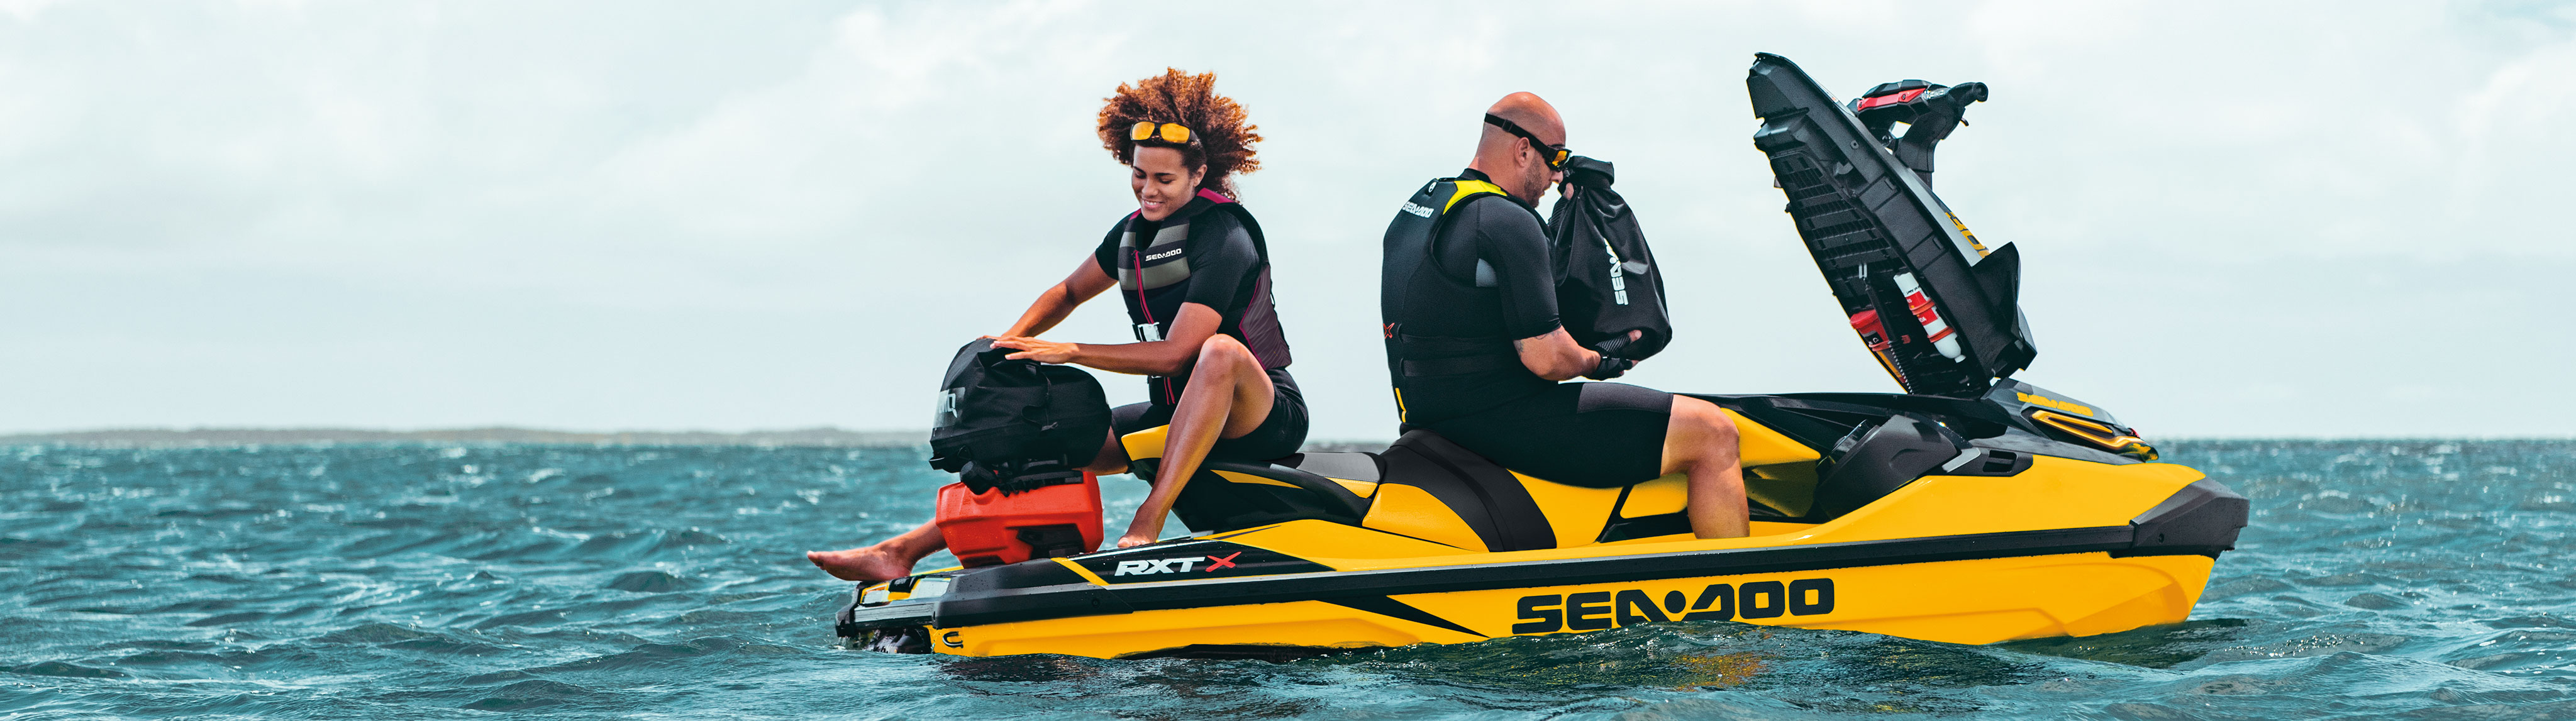 Couple on a Sea-Doo RXP-X with LnQ Accessoires